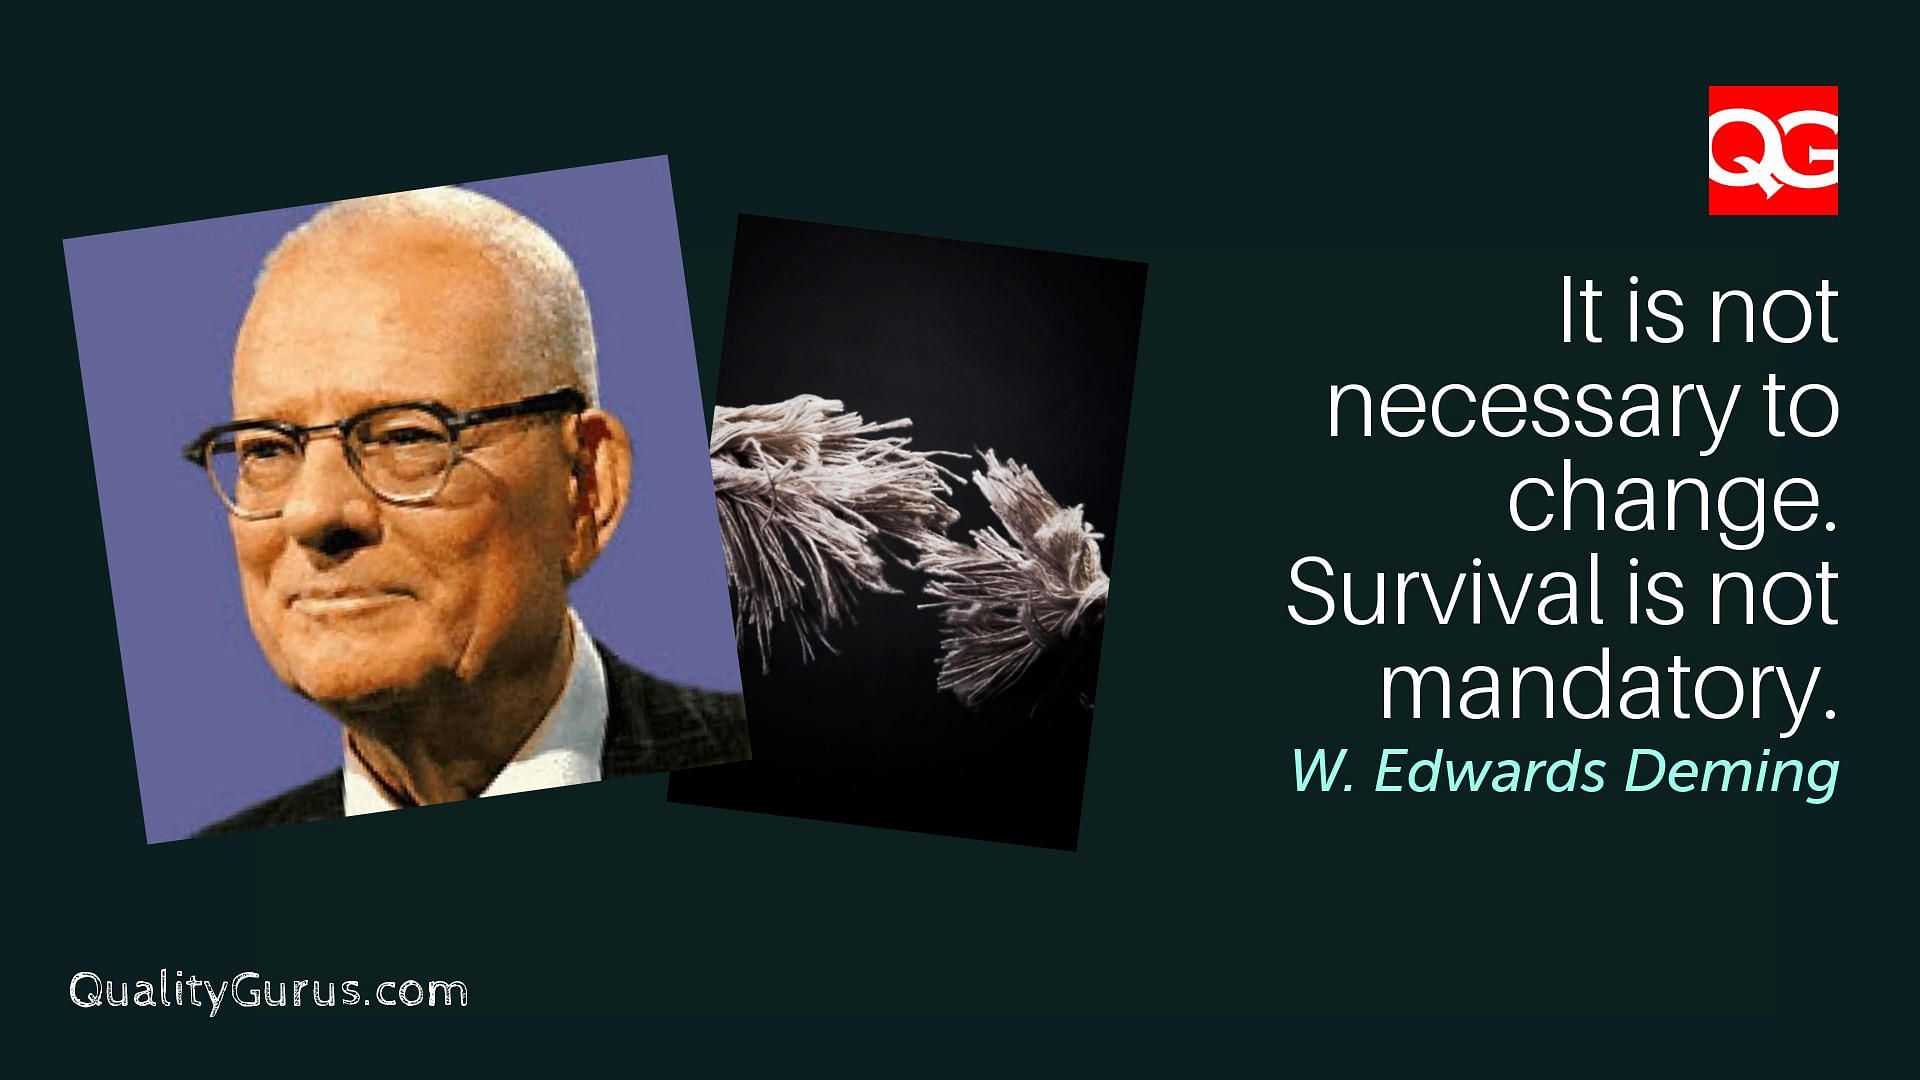 Edwards Deming – Life Story And Teachings | Quality Gurus